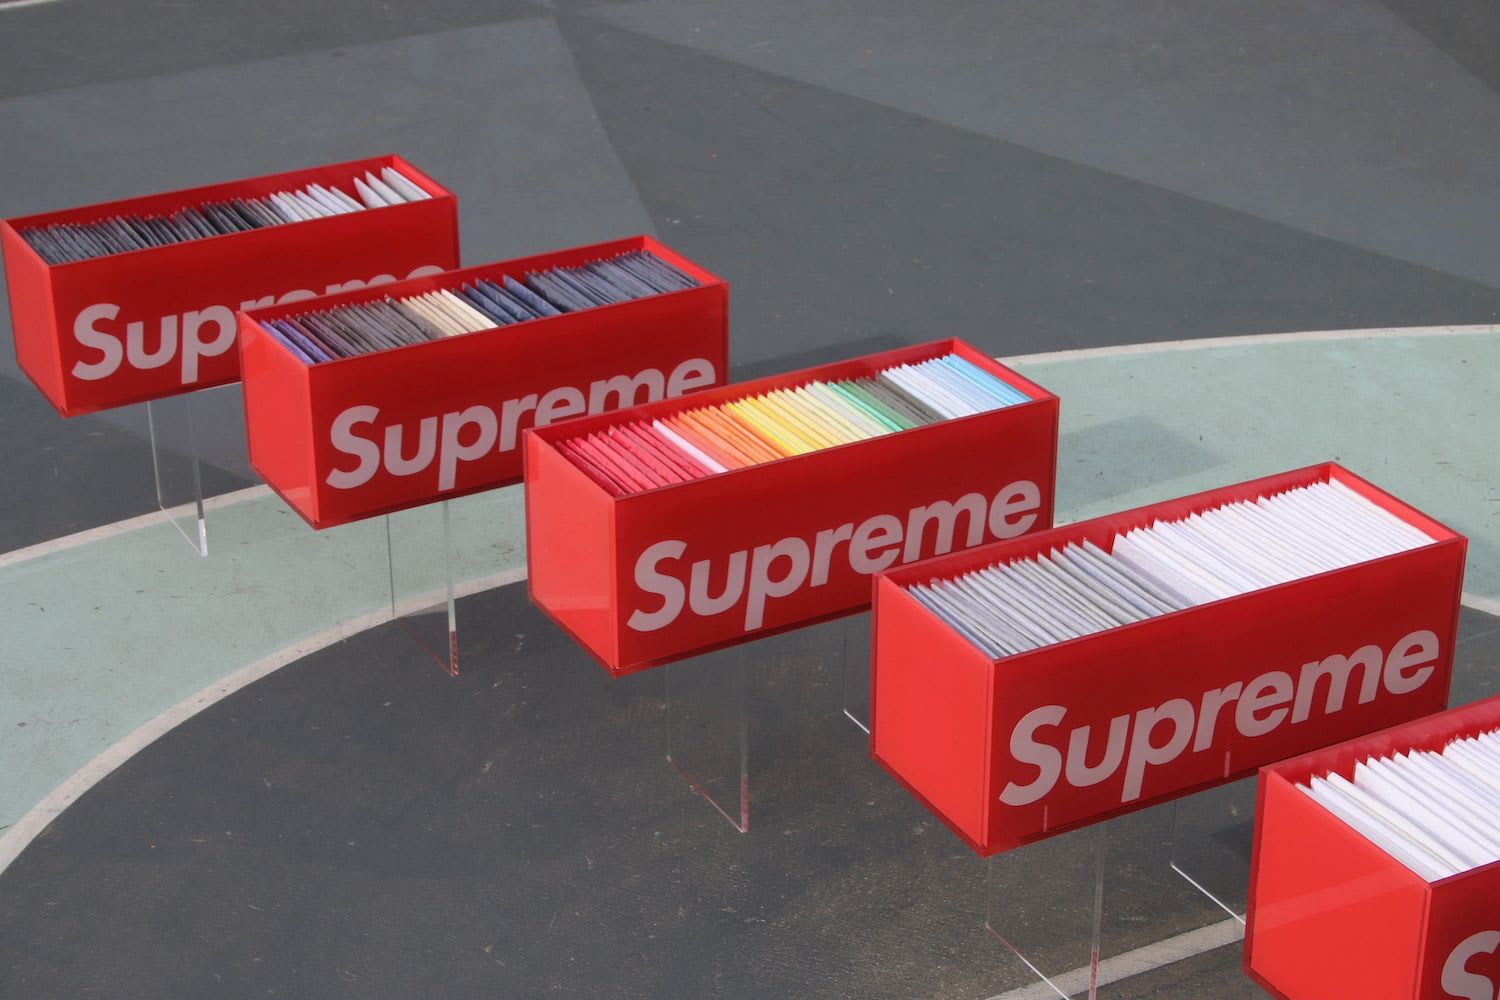 How a 21-Year-Old Supreme Collector Purchased Every Single Box